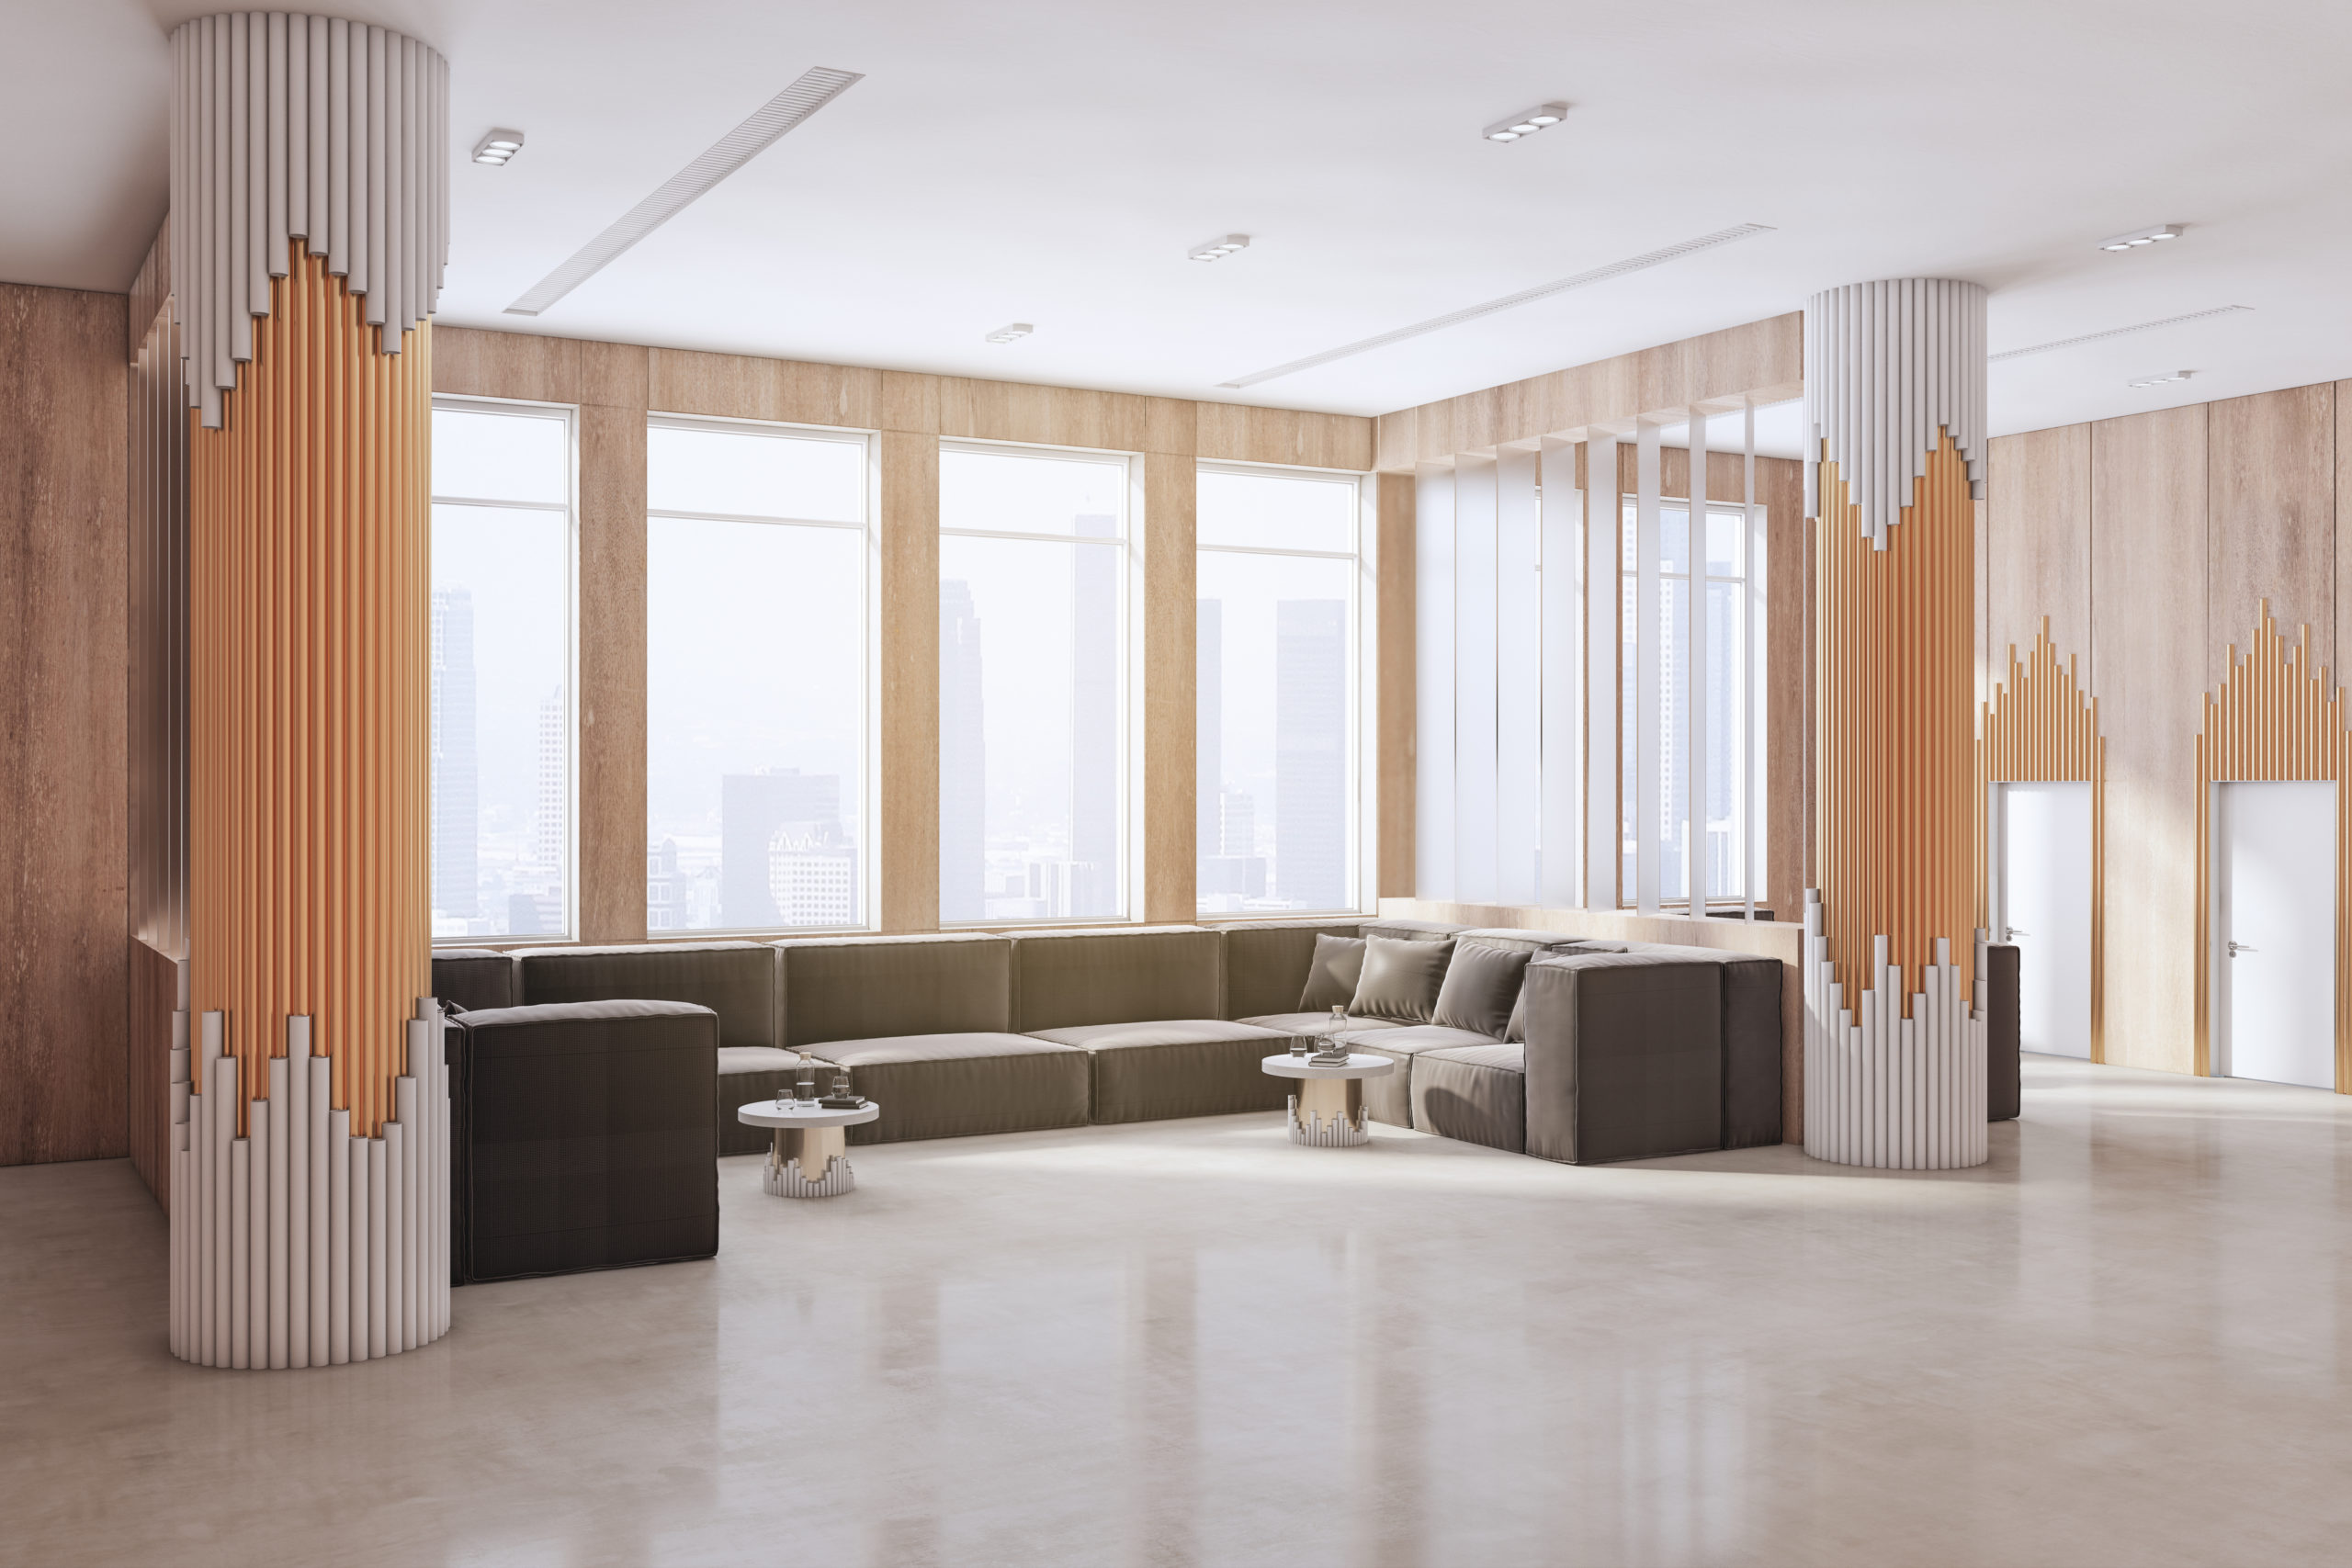 New Office Design Trends: Faux Columns and More